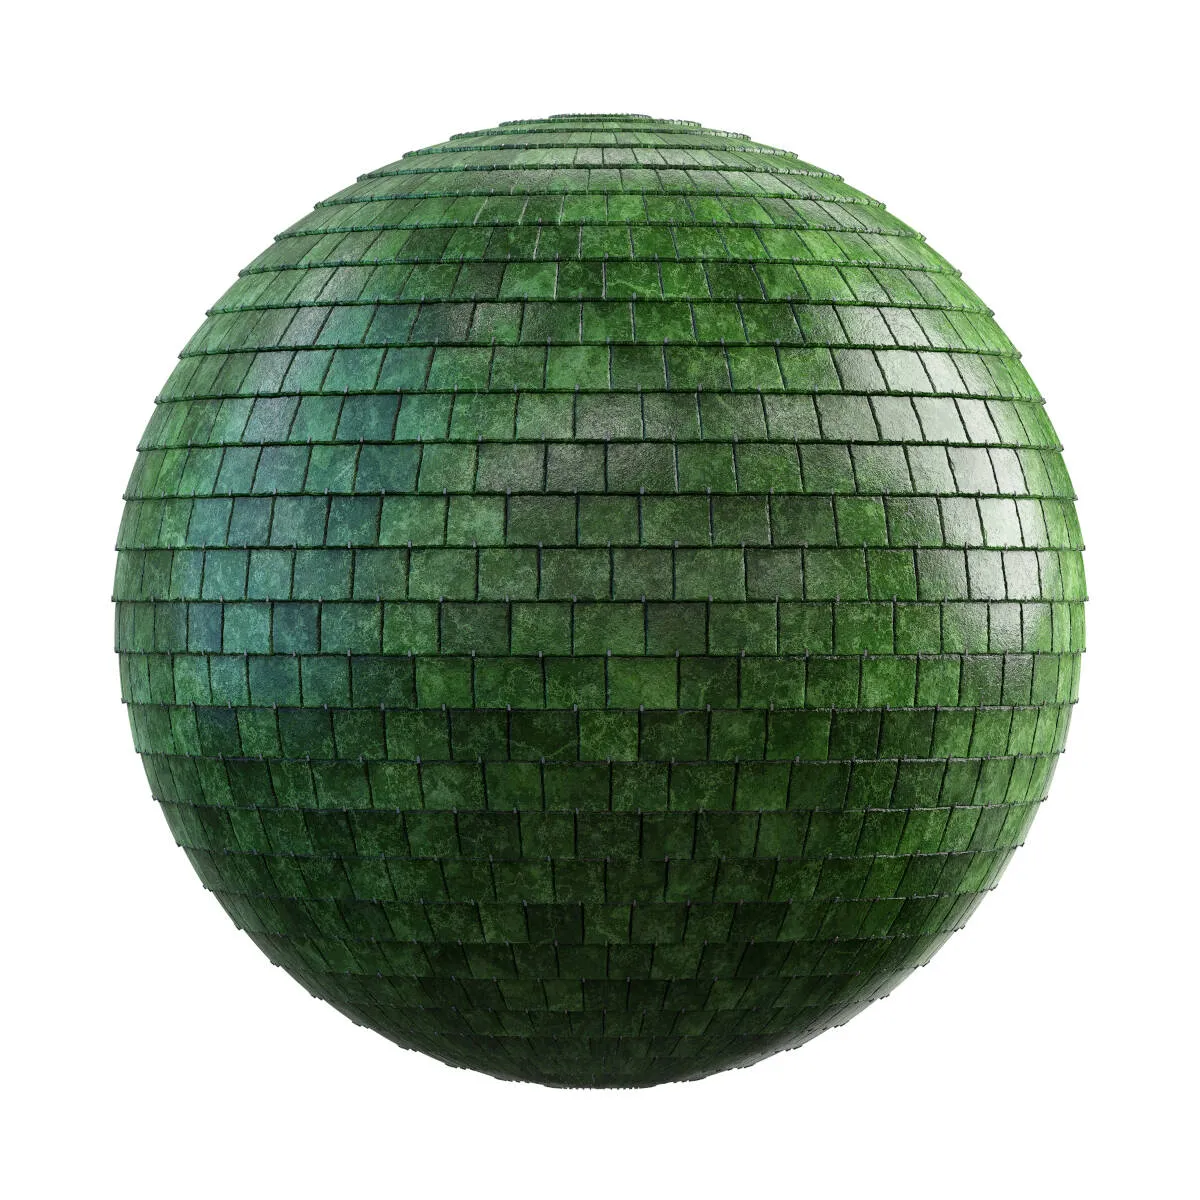 PBR Textures Volume 35 – Roofs – 4K – green_stone_tile_roof_35_61